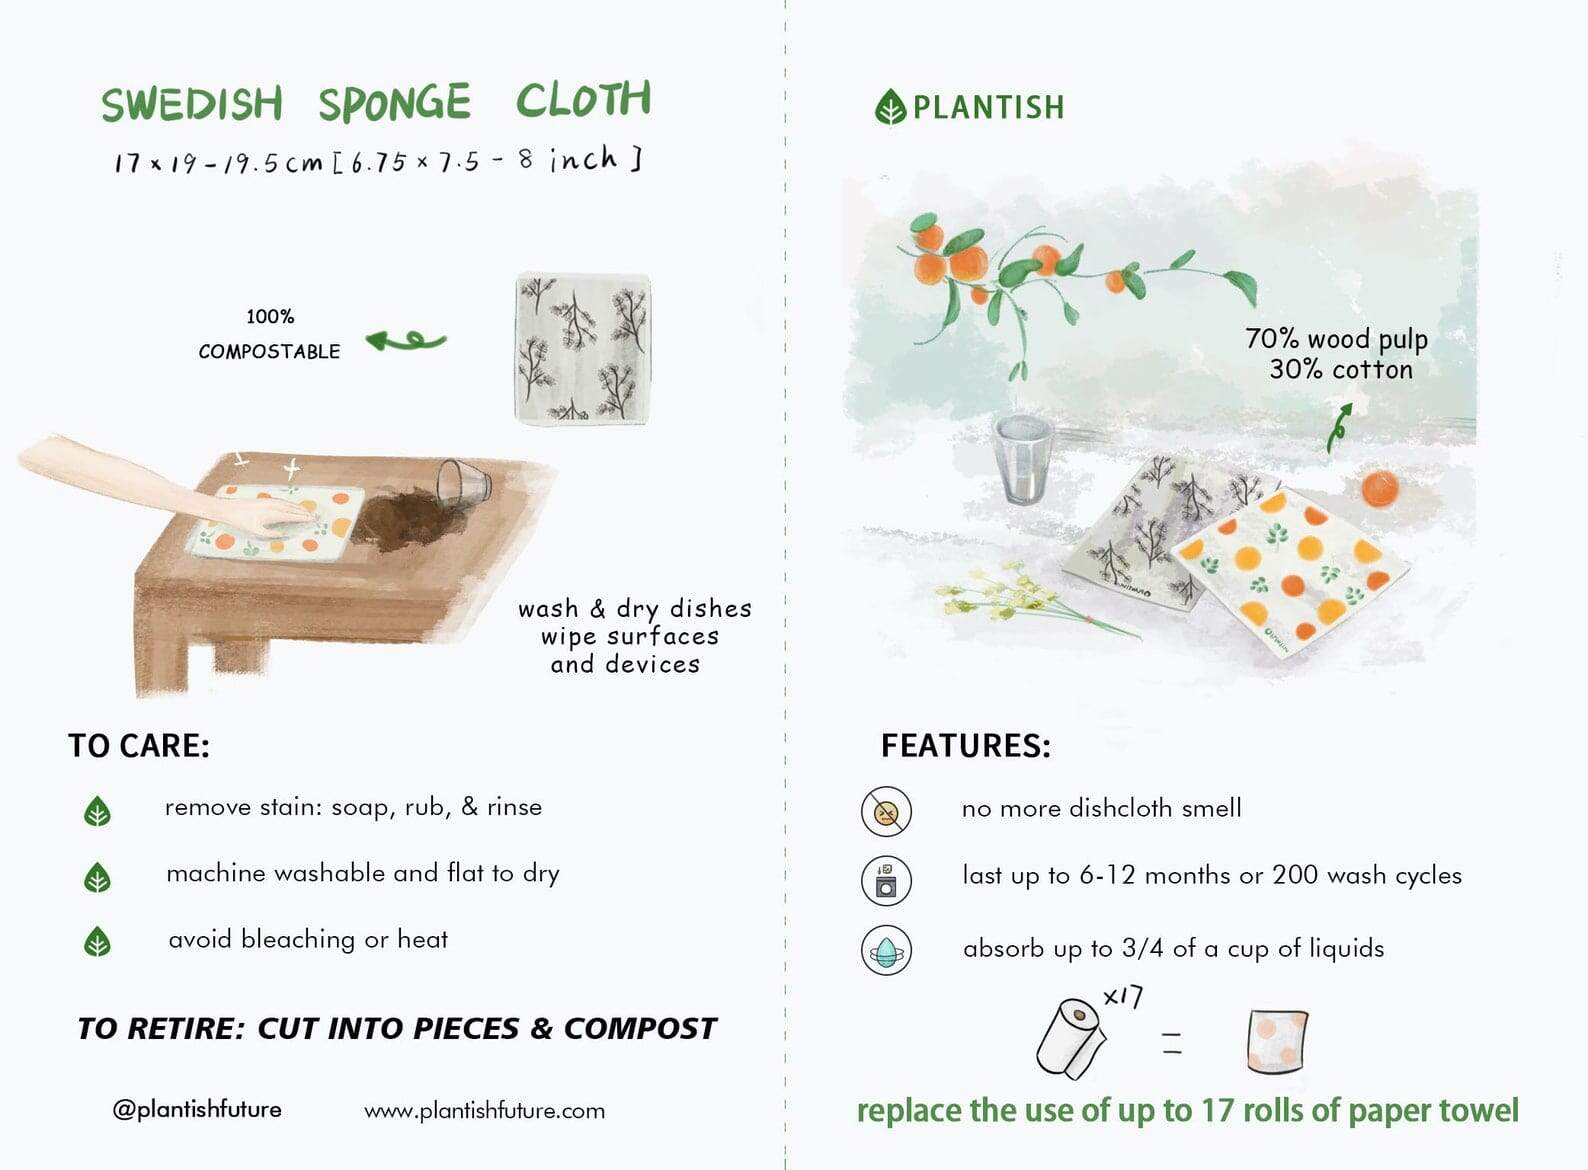 Care tips infographic for reusable dishcloth. Replace the use of up to 17 rolls of paper towel. Made of wood pulp and cotton, making it plastic free and eco friendly.